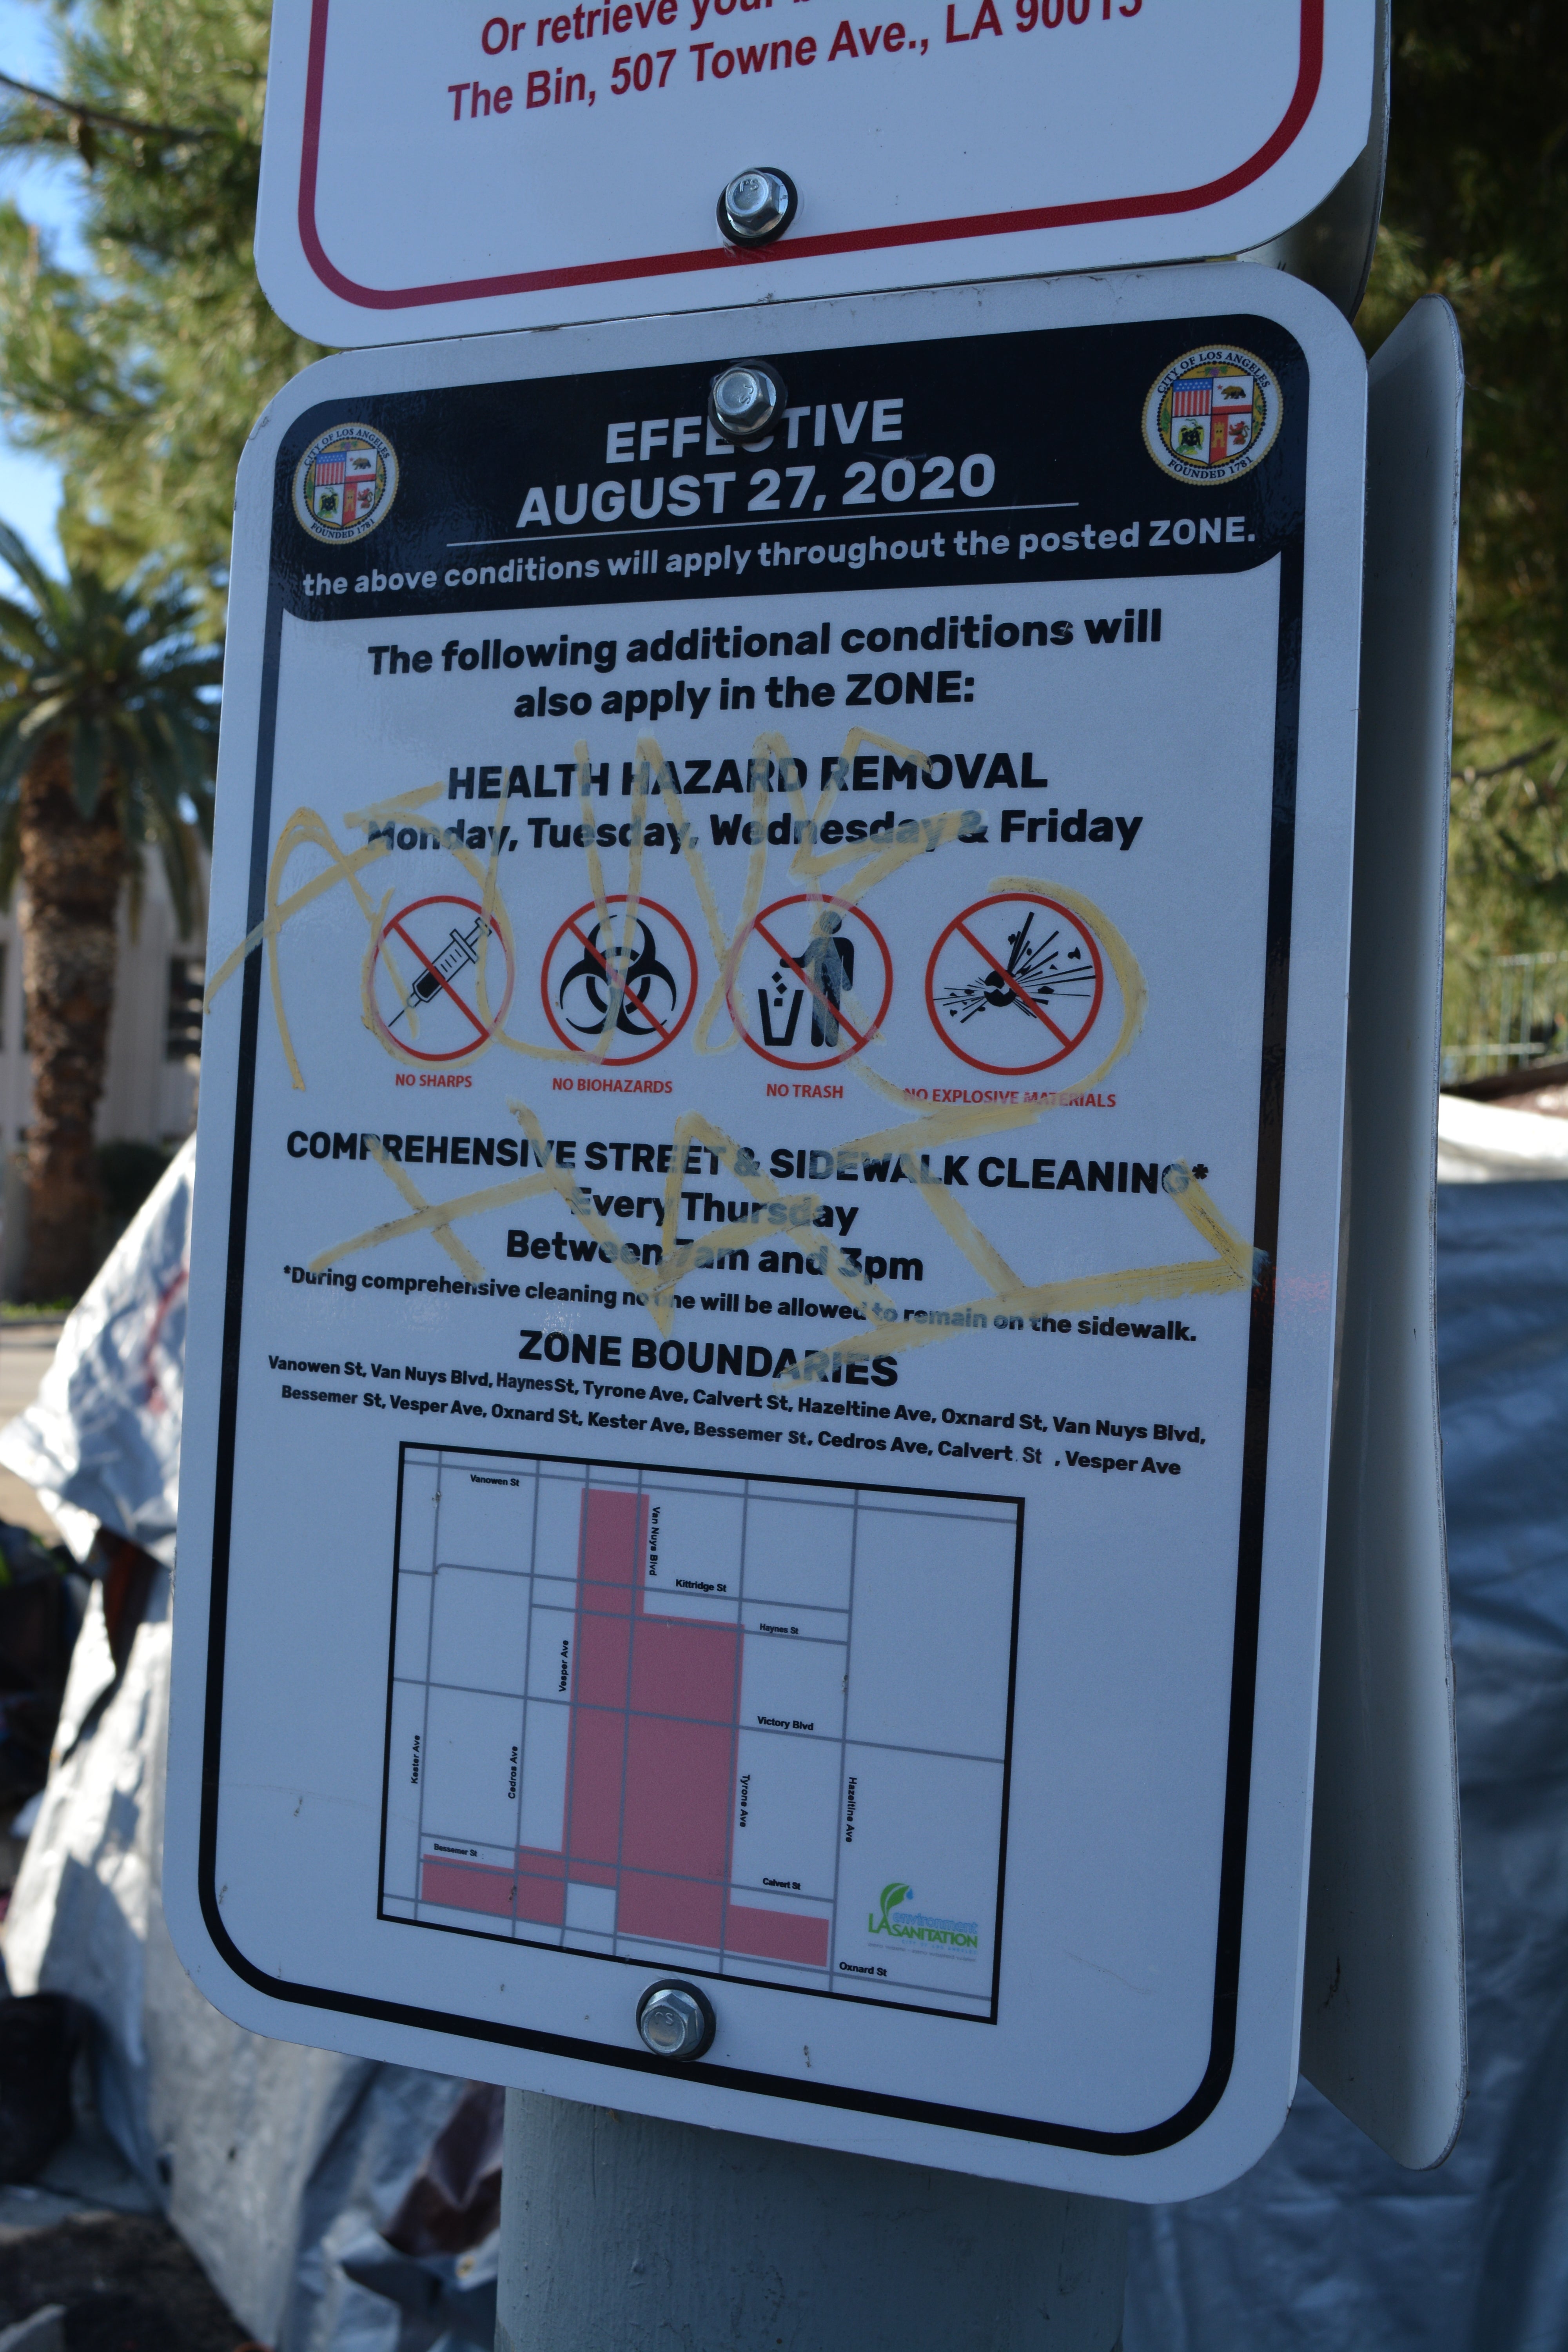 Homeless people can be arrested for camping within numerous protected “41.18” zones across Los Angeles